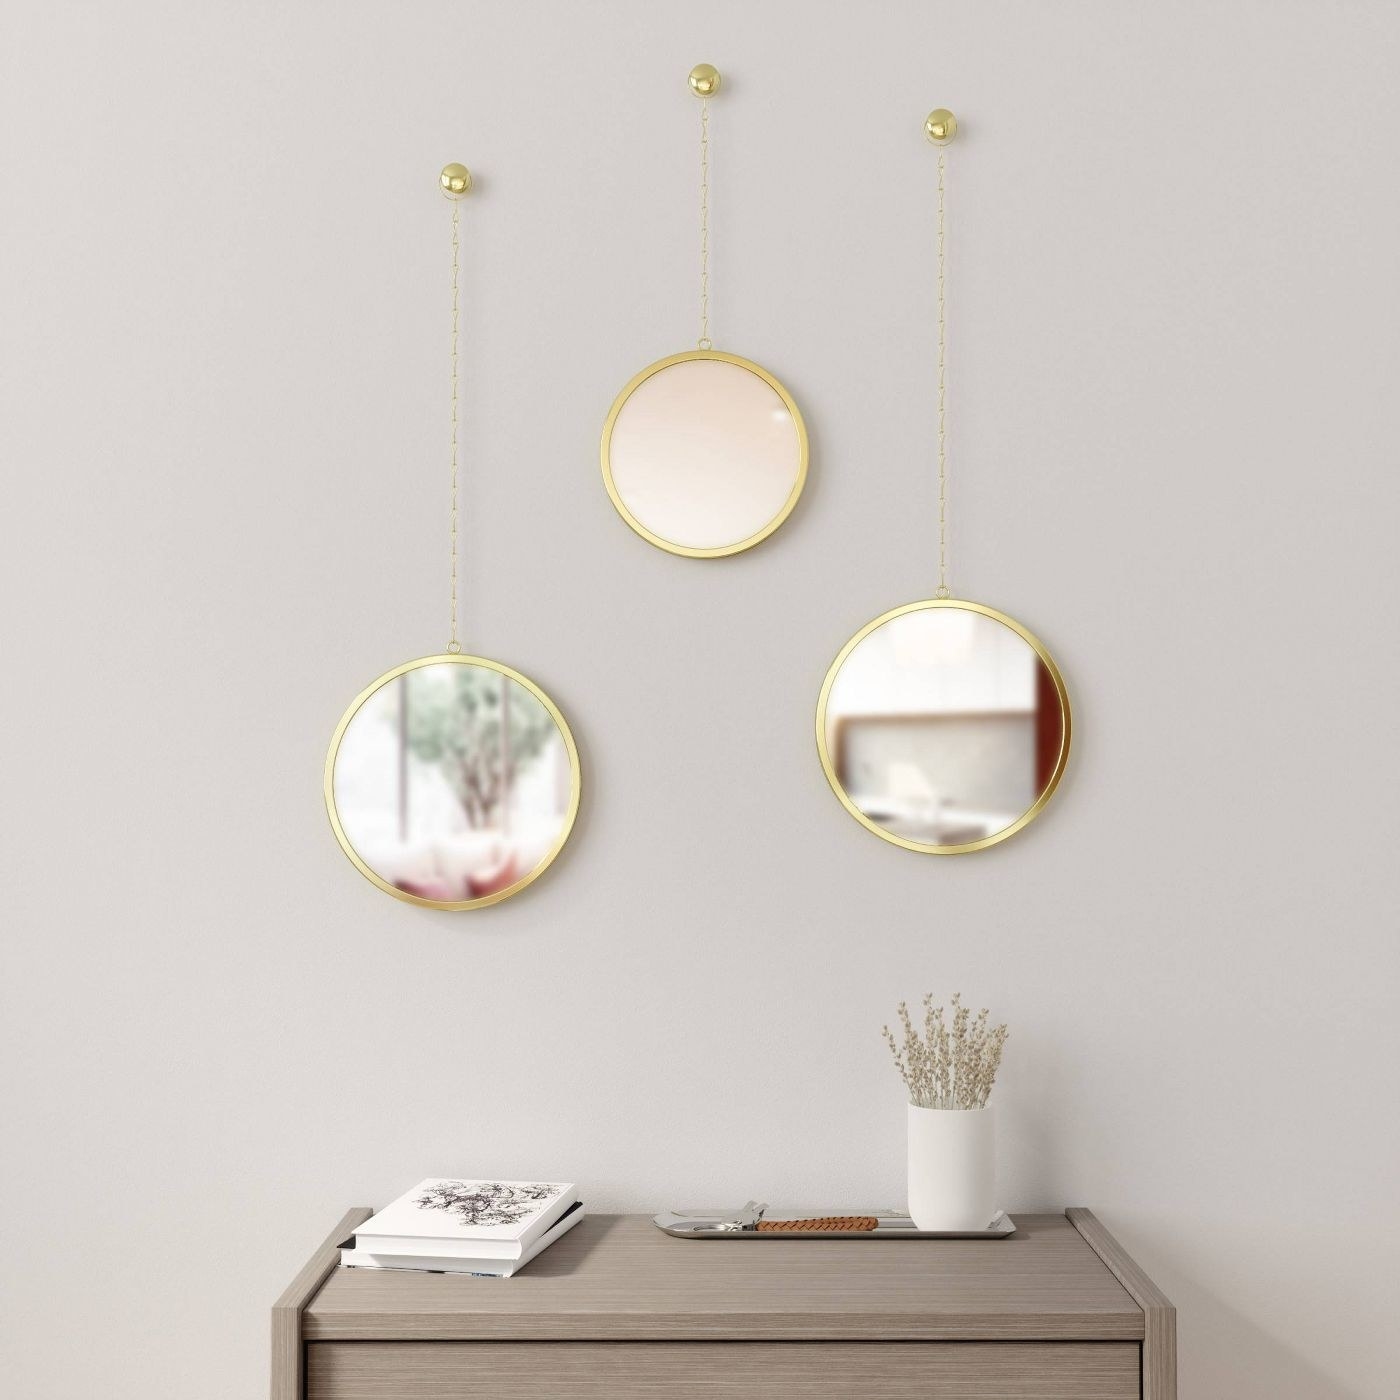 three round decorative mirrors hanging up on a wall over a dresser